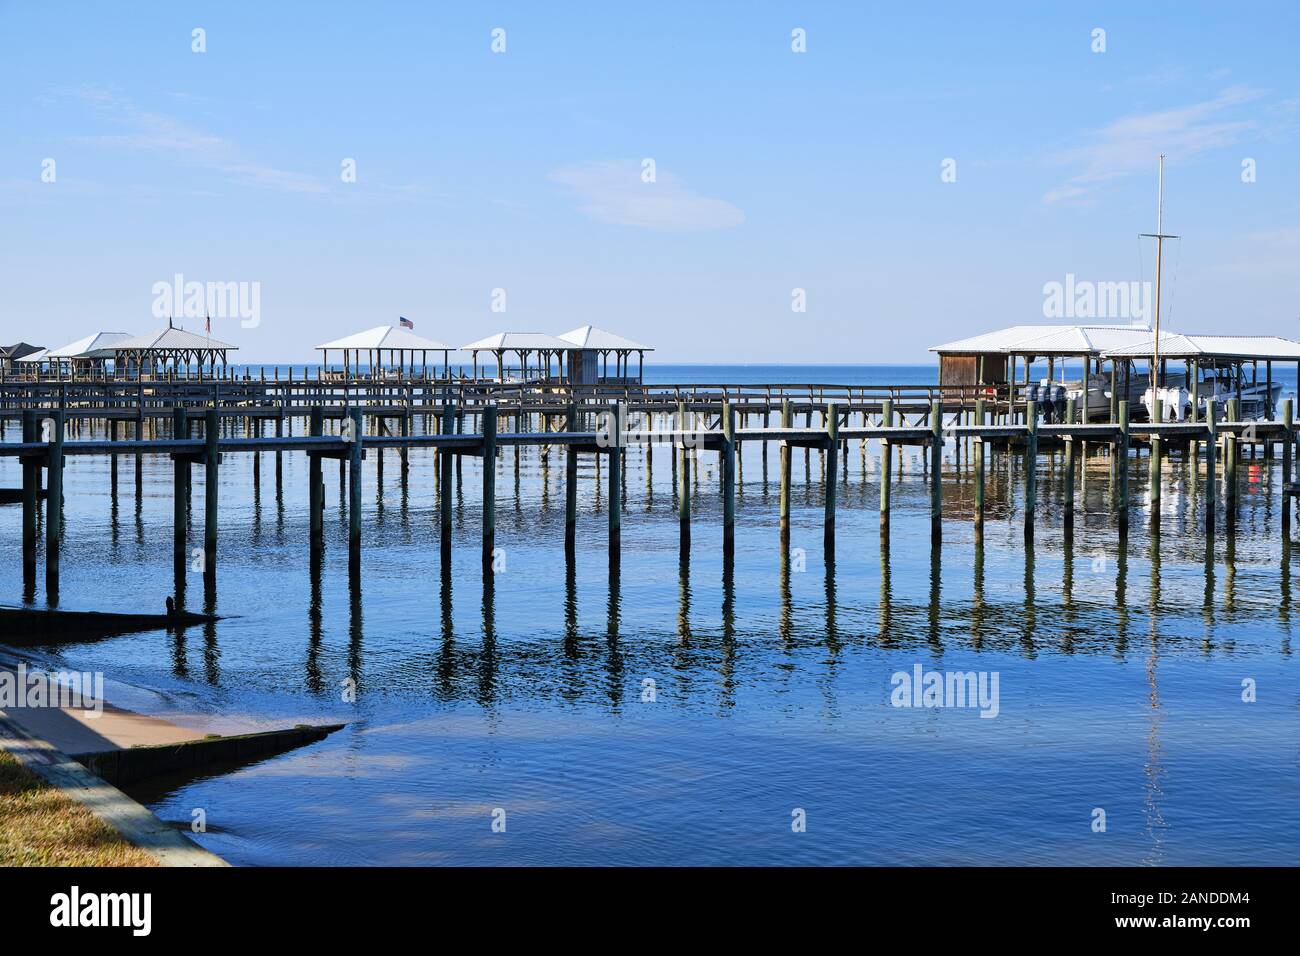 Boat houses or boat lifts and docks jutting into the water in Point Clear Alabama on the eastern shore of Mobile Bay, USA. Stock Photo